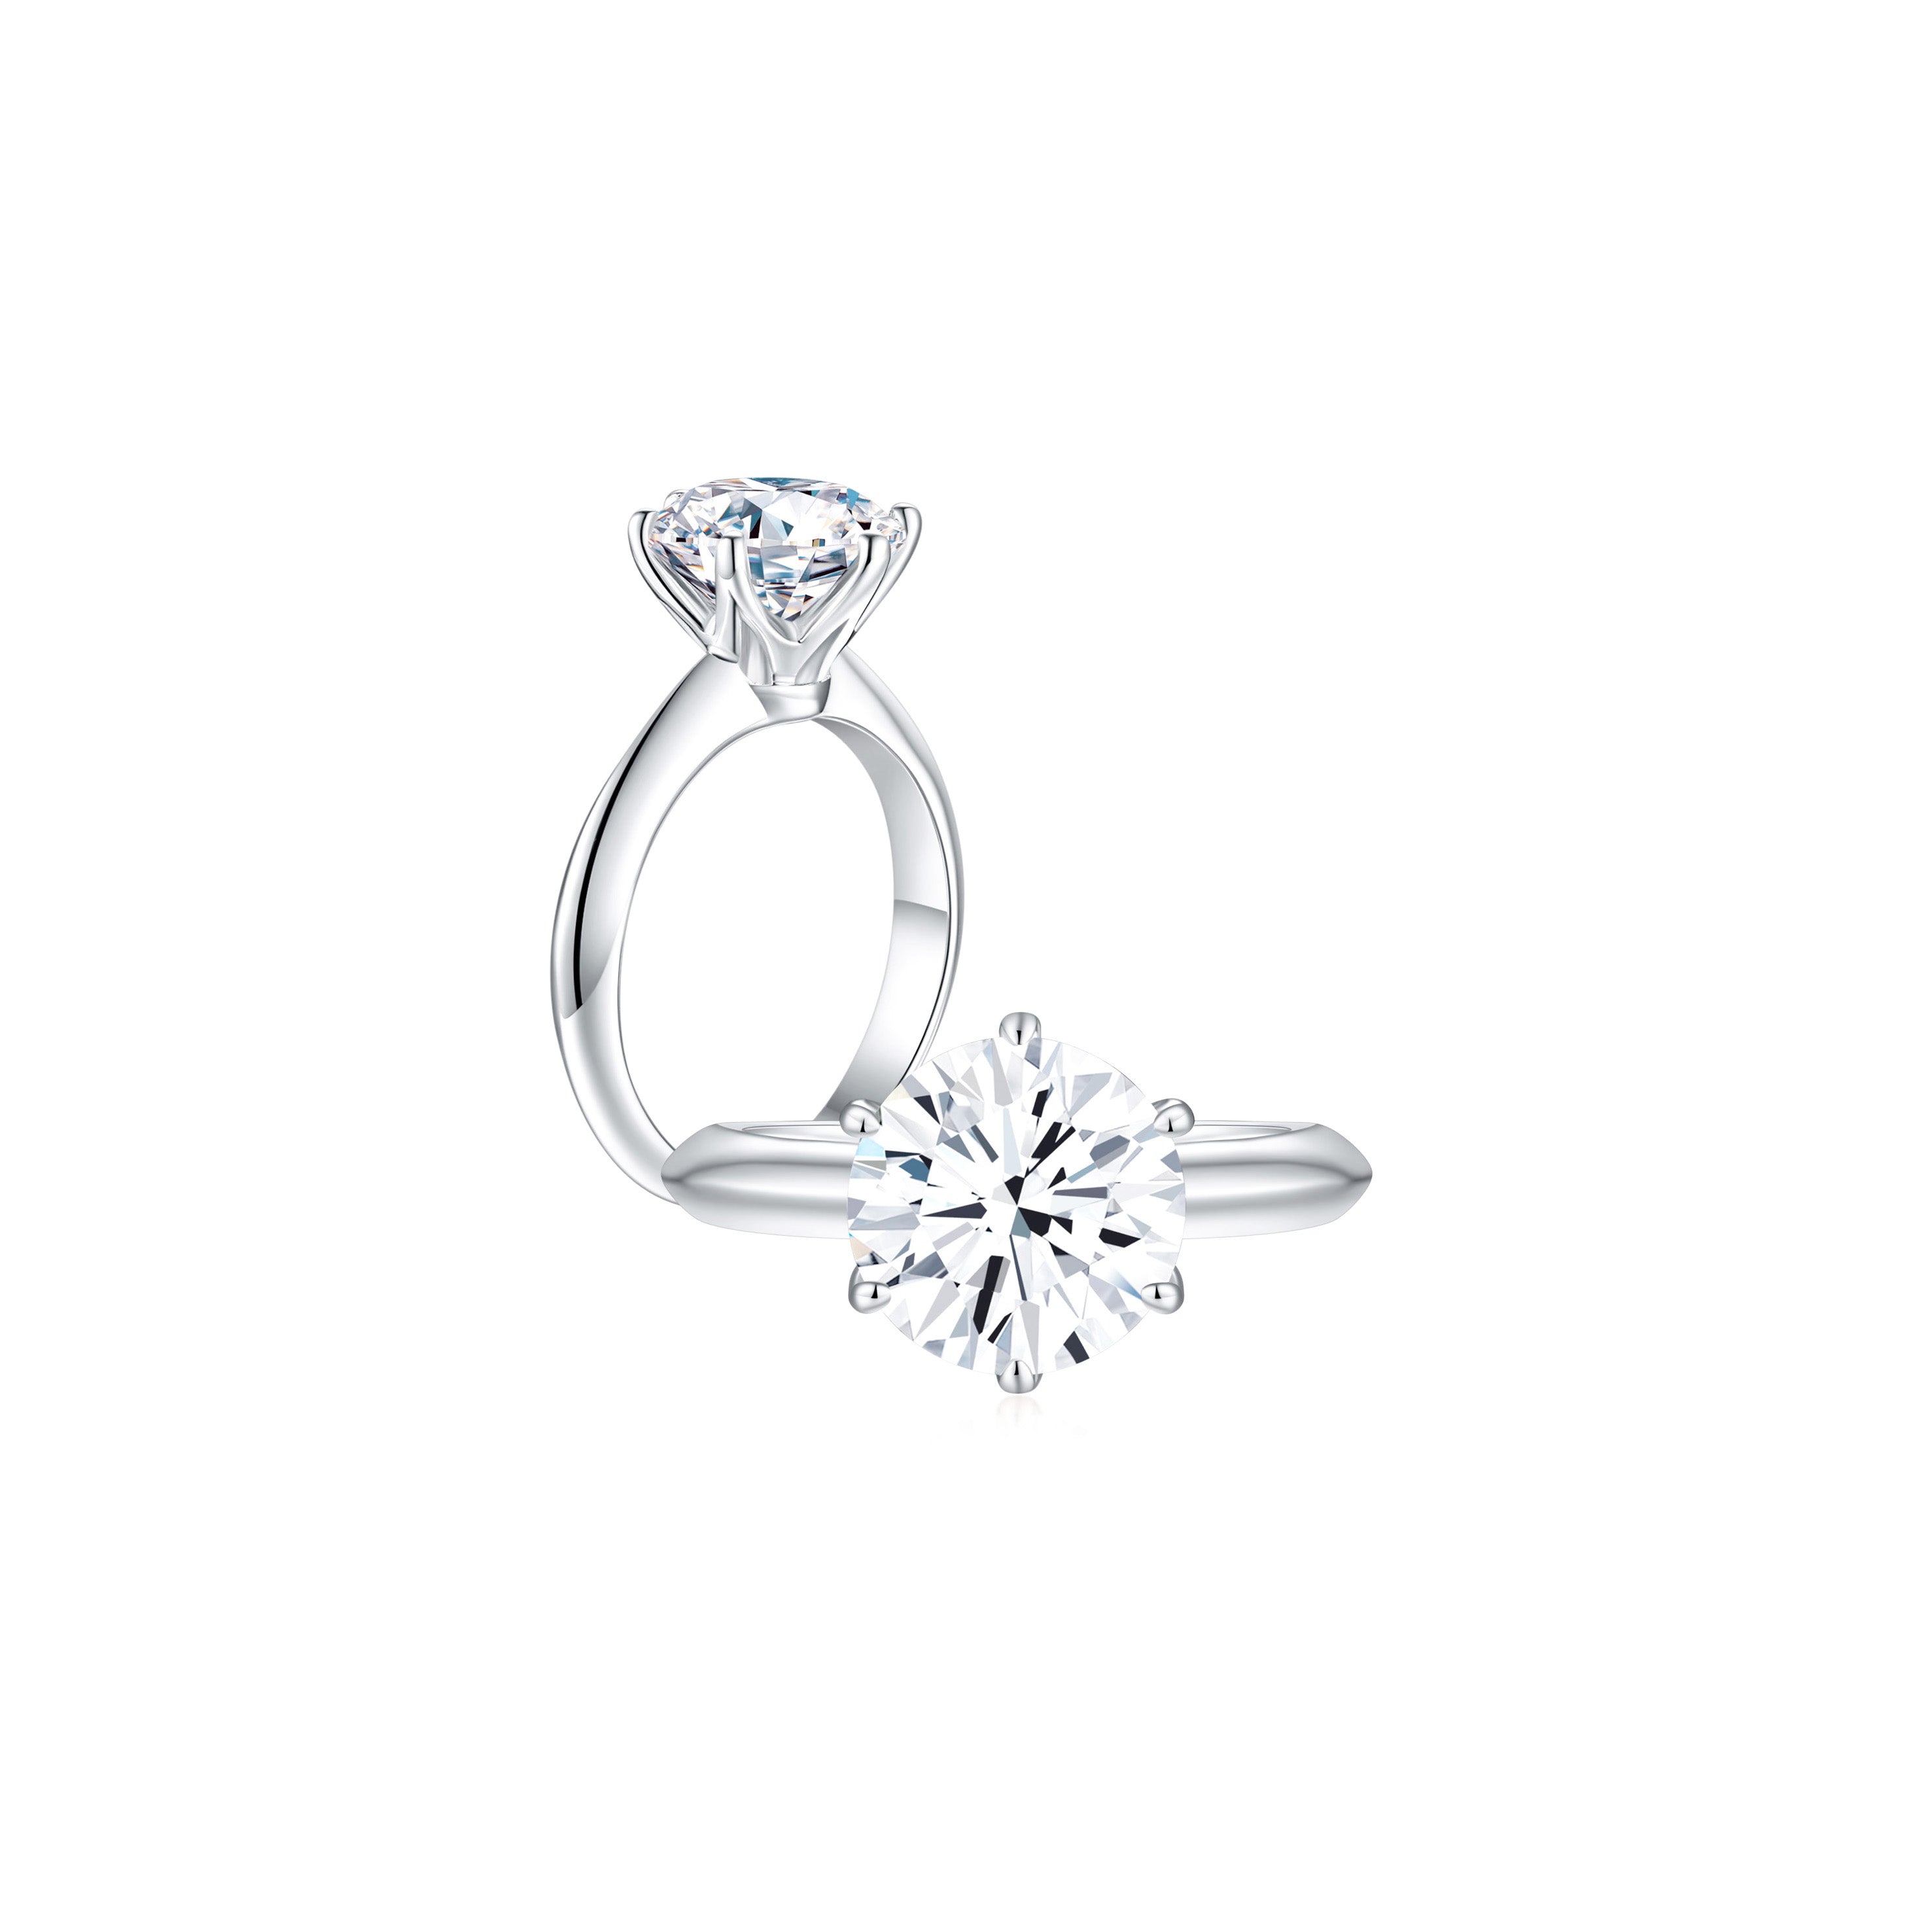 Éclat Classic Solitaire Ring both - Eclat by Oui